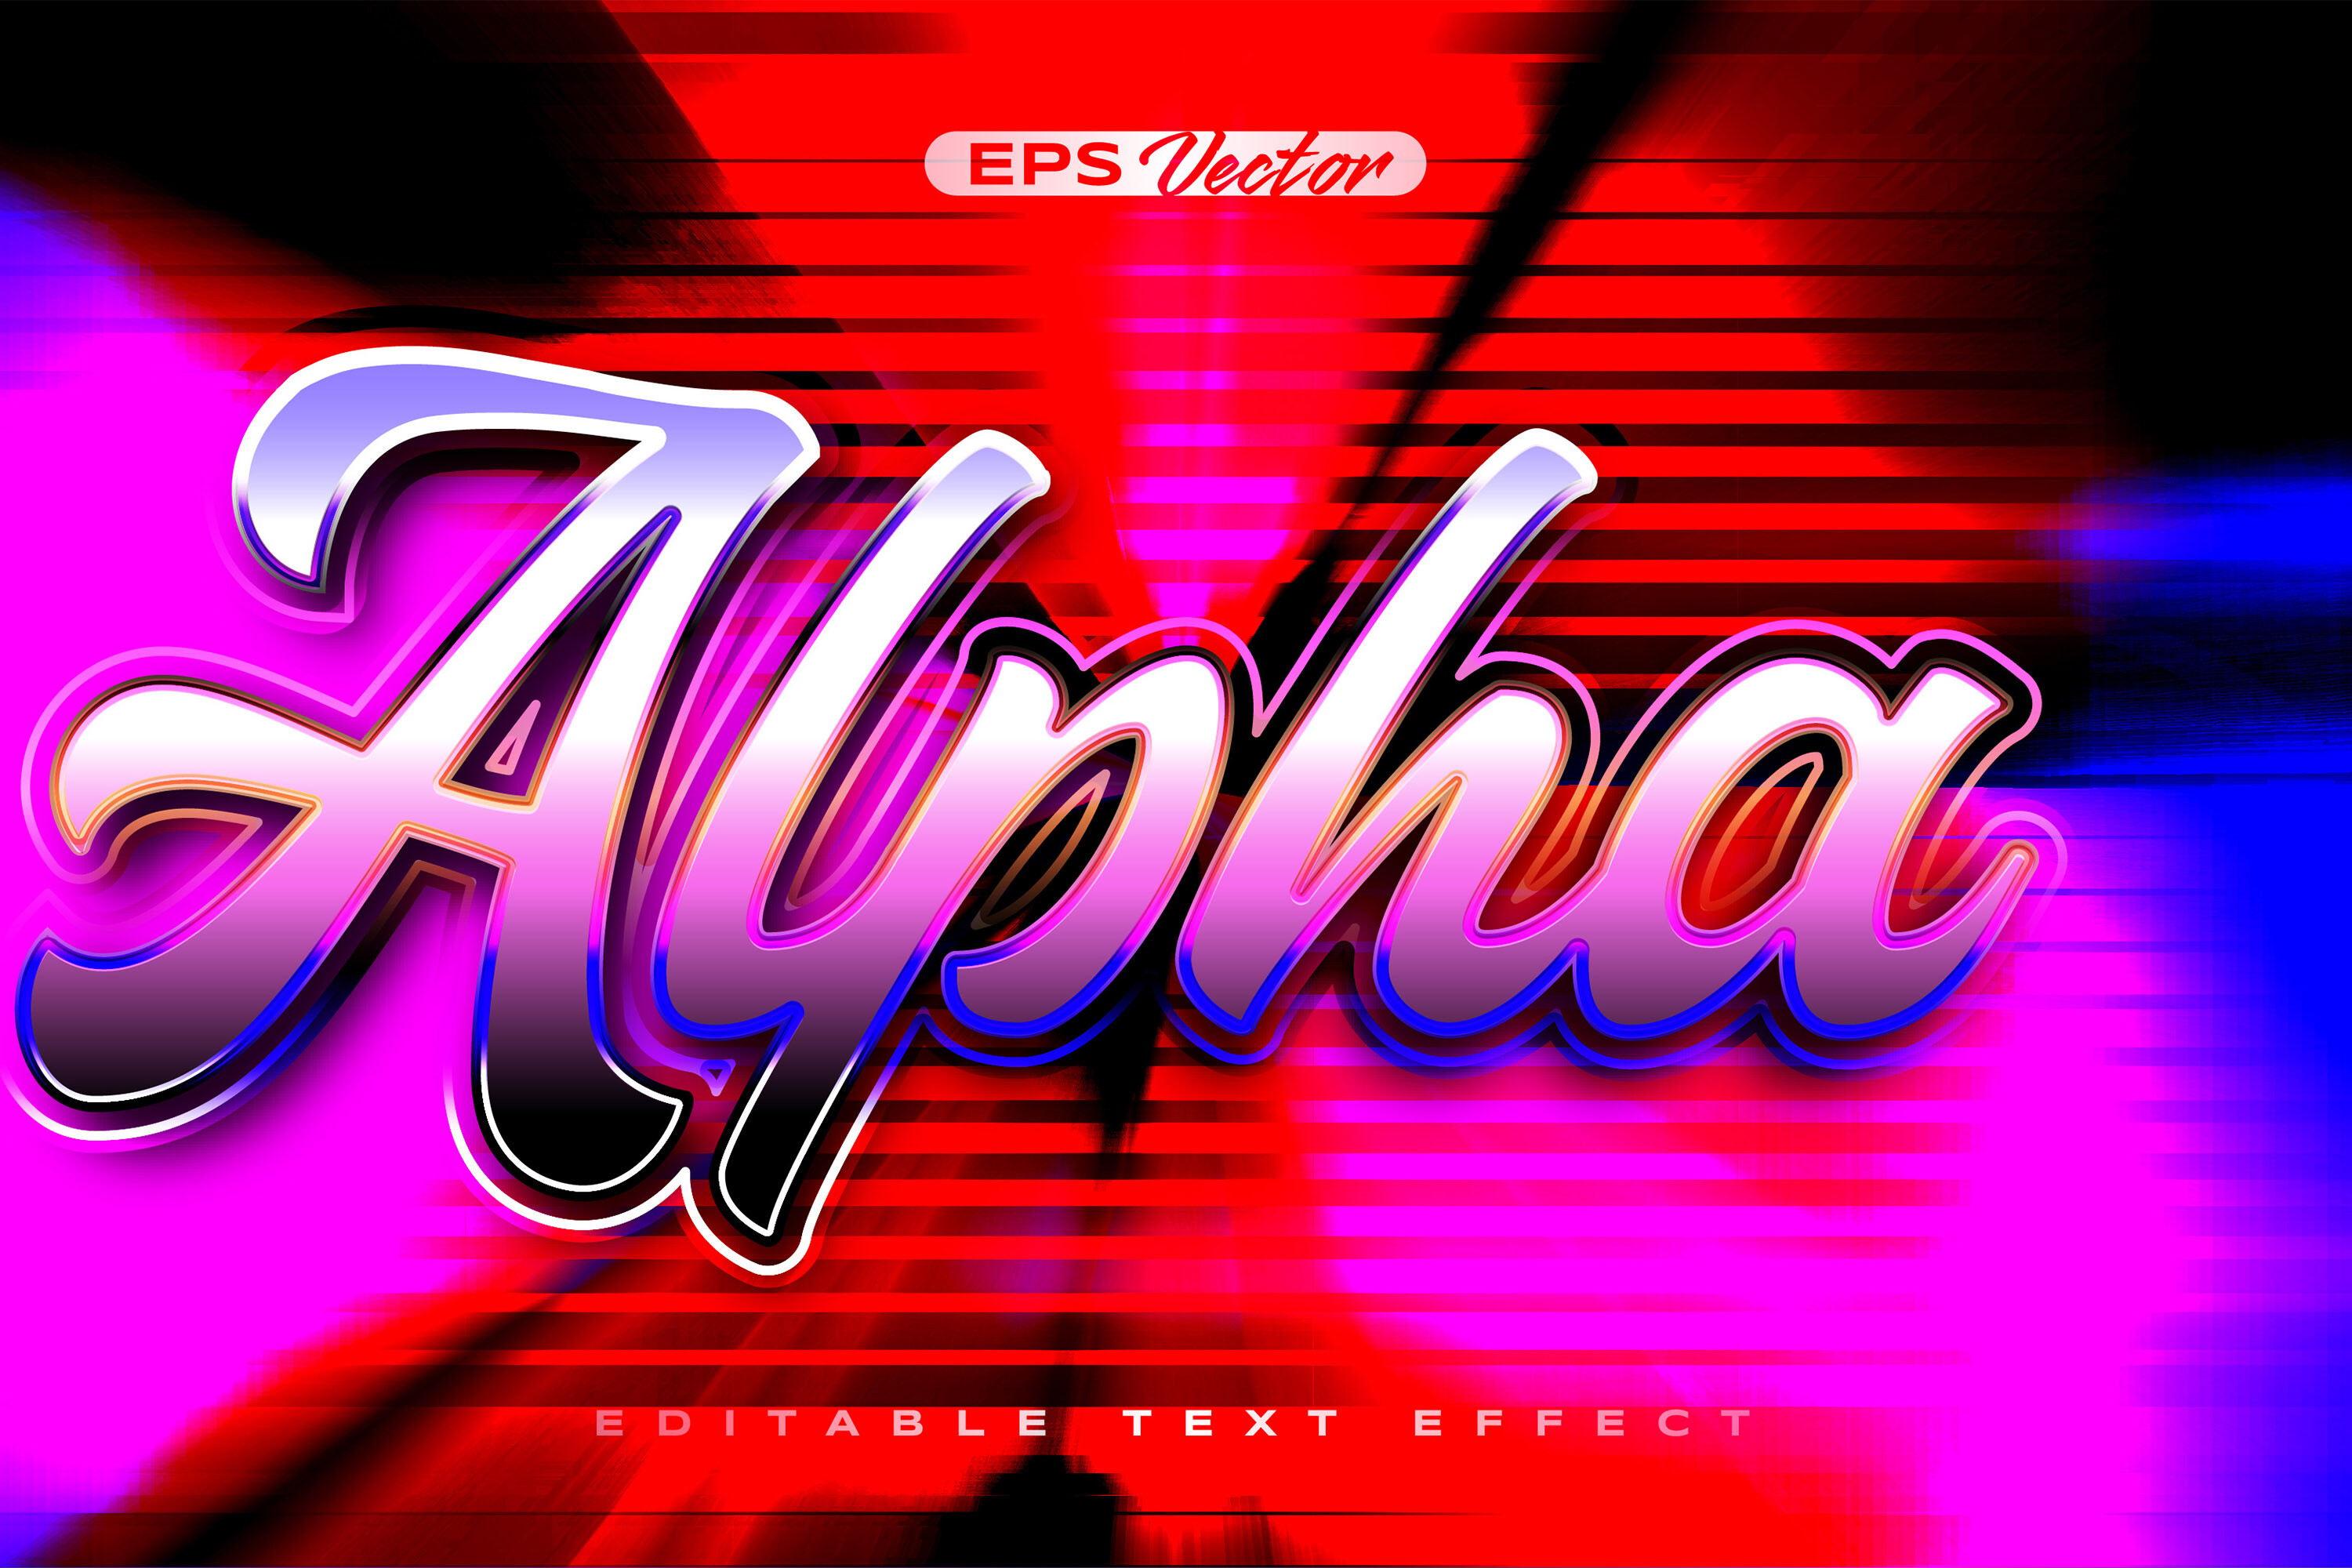 Retro shiny Y2K editable text effect discovery cyber